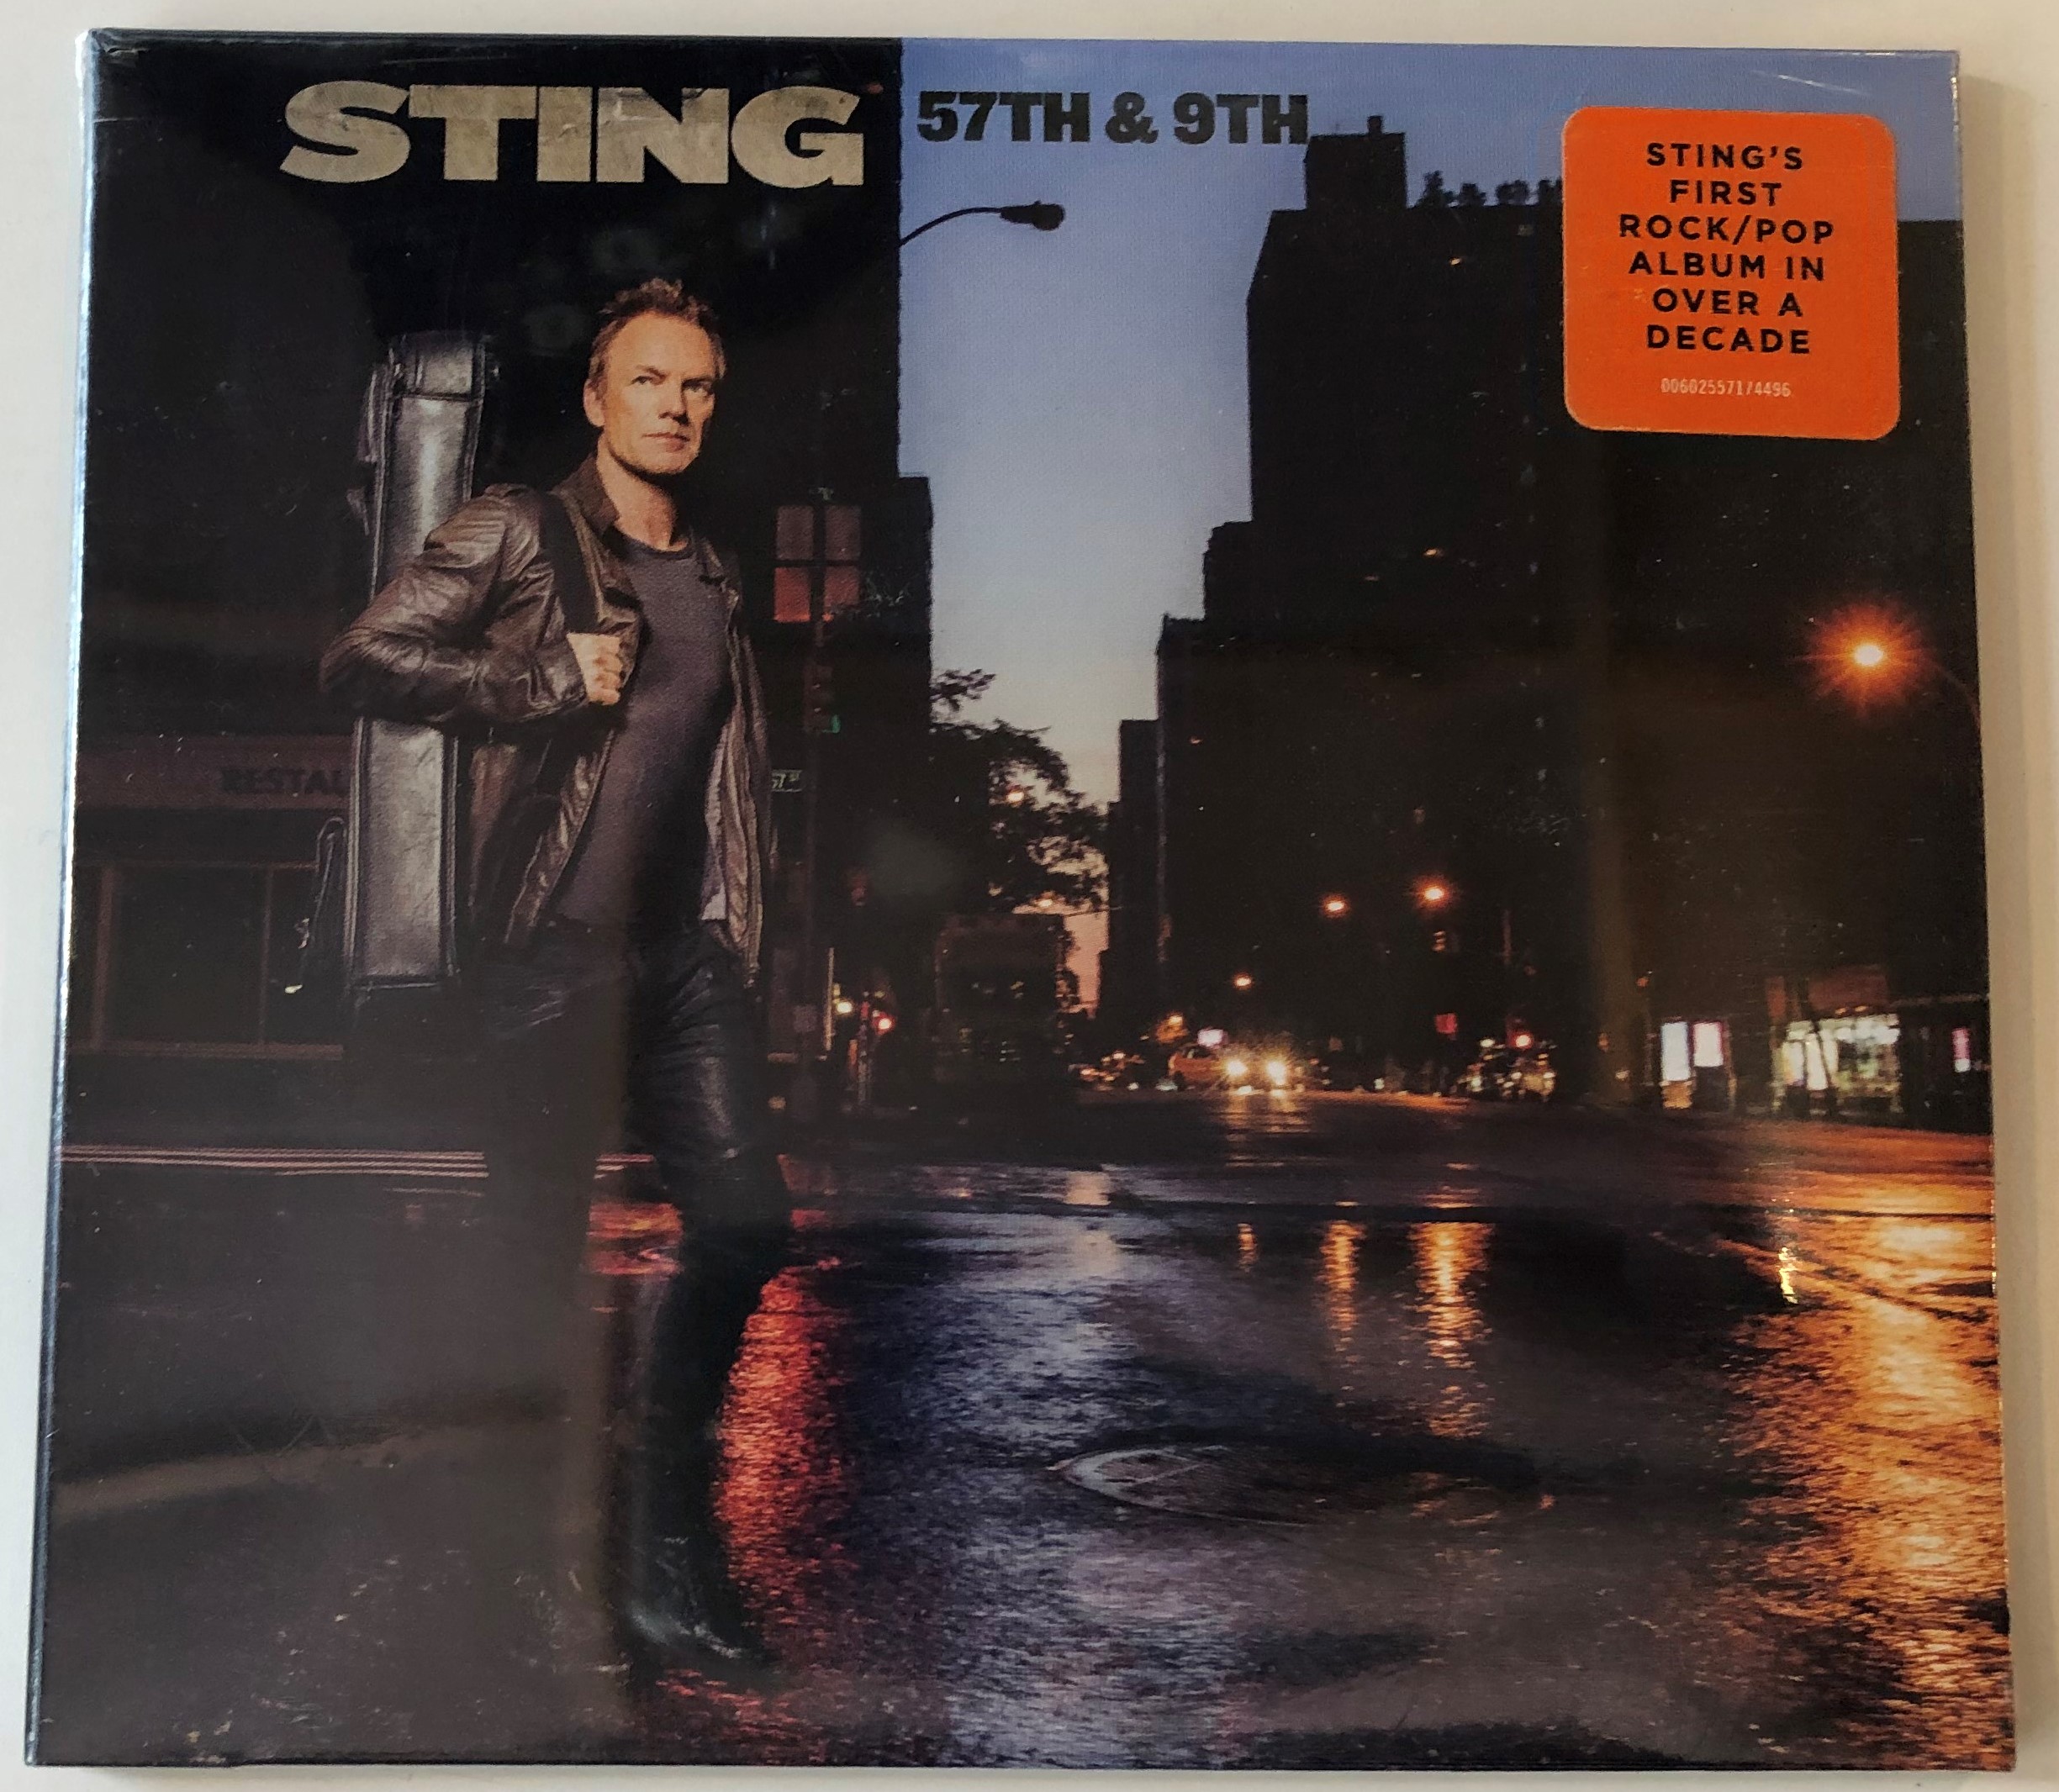 sting-57th-9th-sting-s-first-rockpop-album-in-over-a-decade-a-m-records-audio-cd-2016-00602557174496-1-.jpg